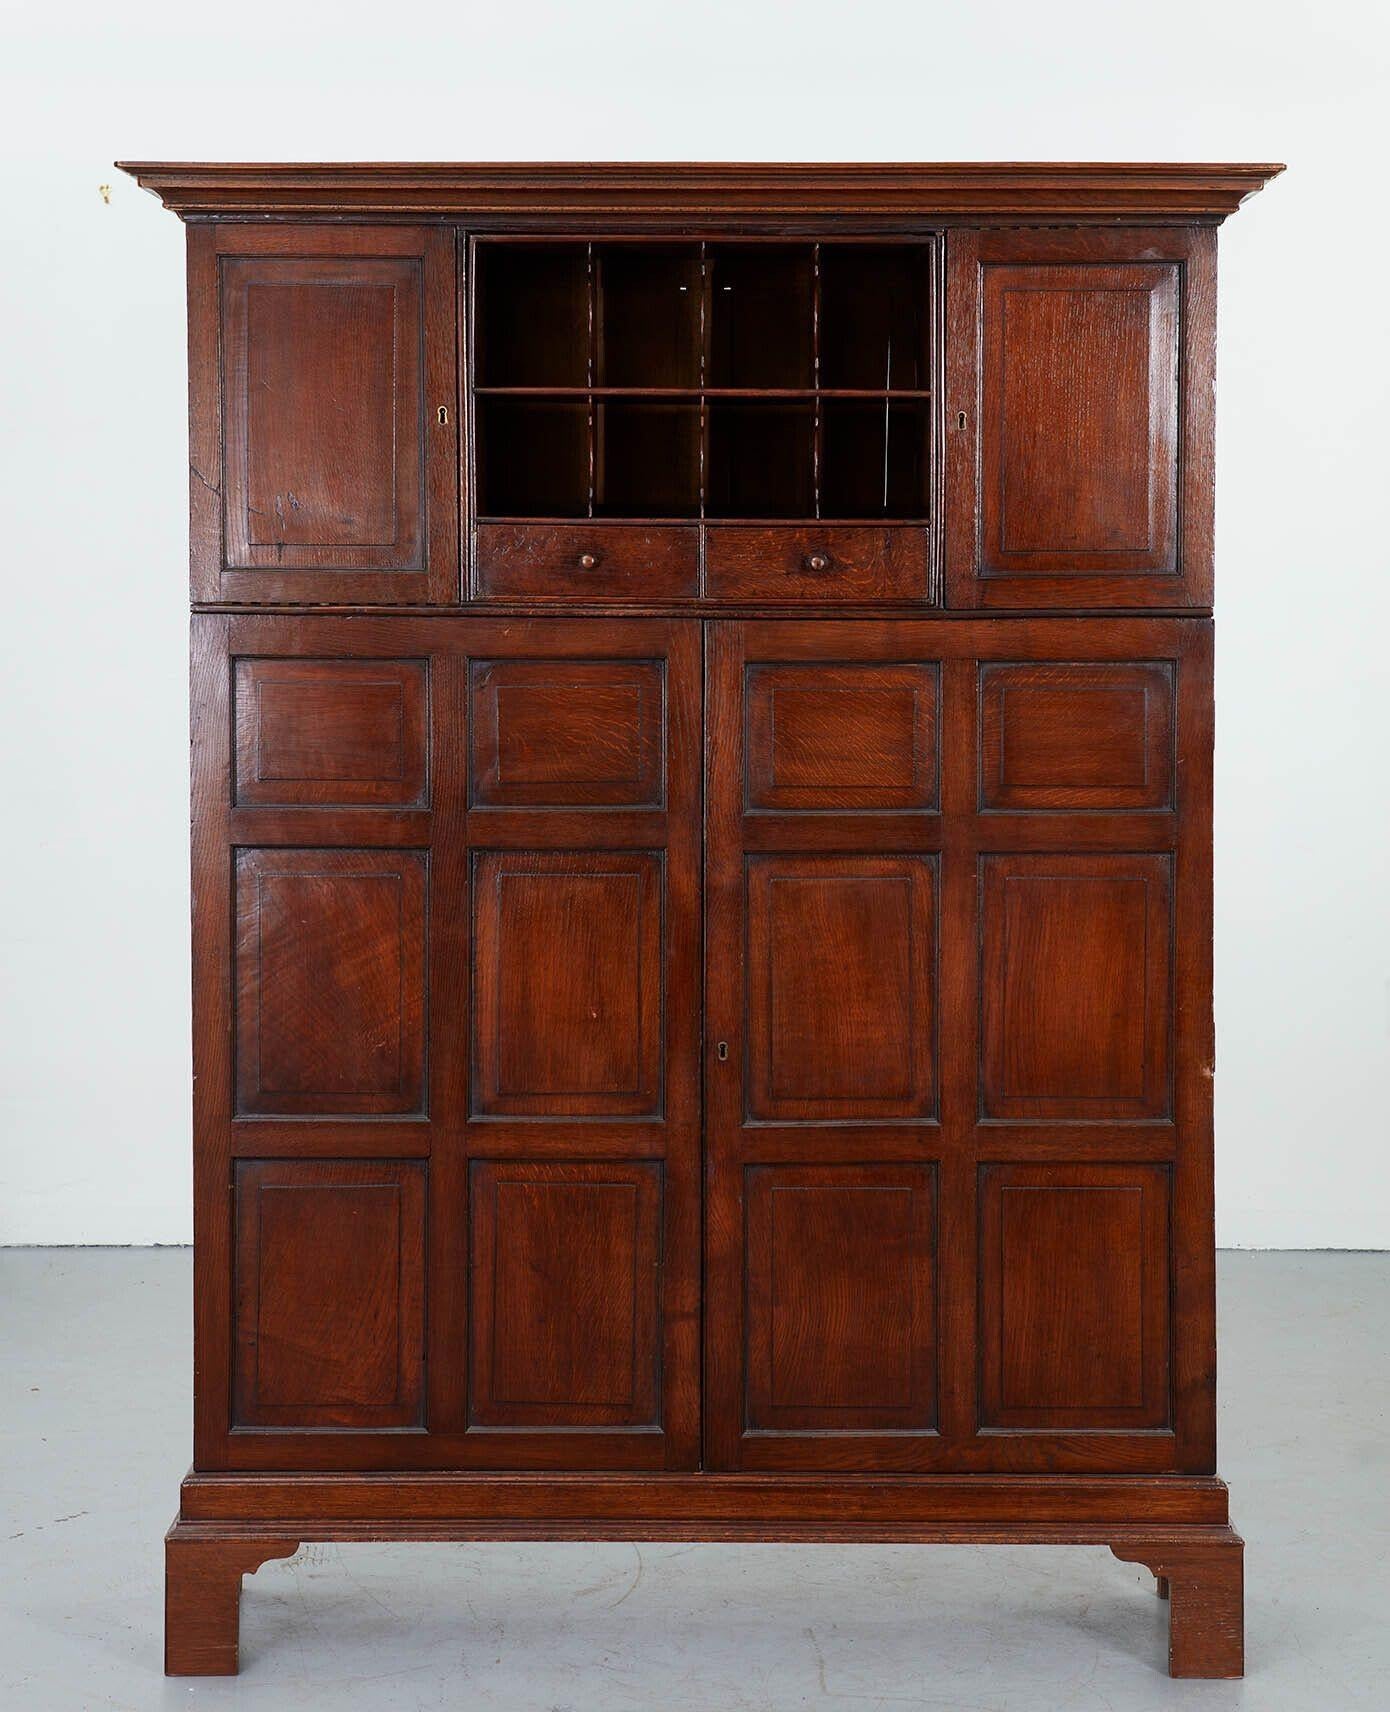 An early 19th century estate cabinet in polished oak from an English country house.  Accomplished estate-made craftsmanship and wonderful timber.  One of a kind.  This piece would have been housed in the estate office to keep the records.  Geometric